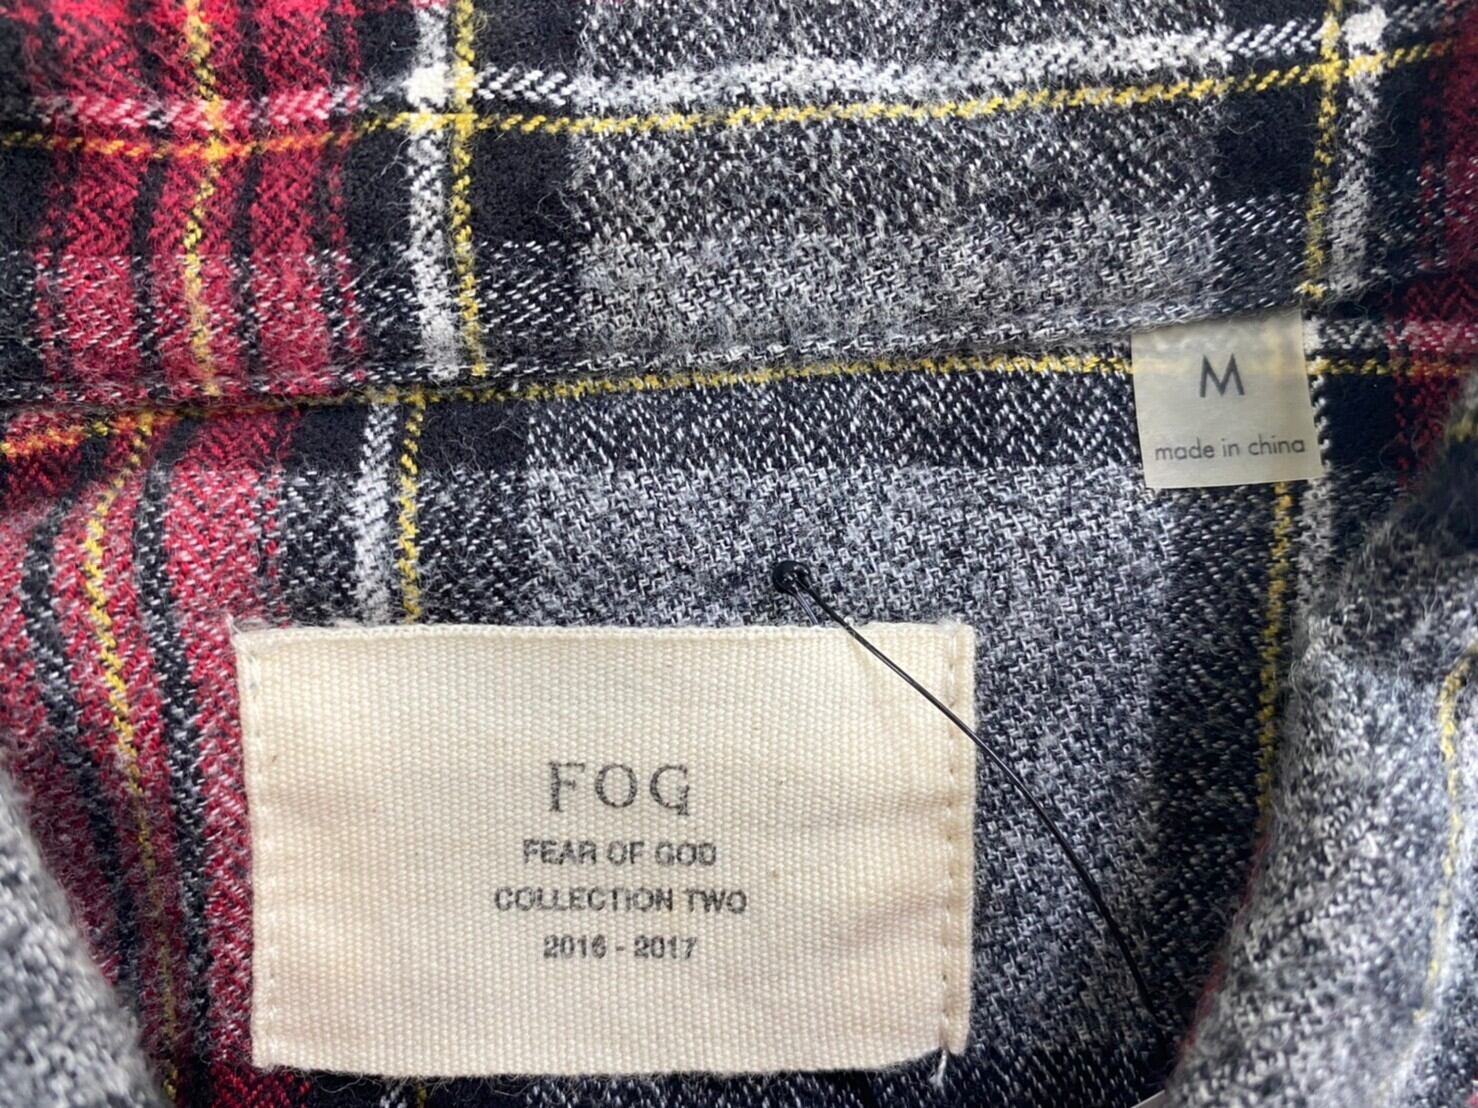 FOG COLLECTION TWO PLAID SLIT FLANNEL SHIRT GREY/RED MEDIUM 88298 ...